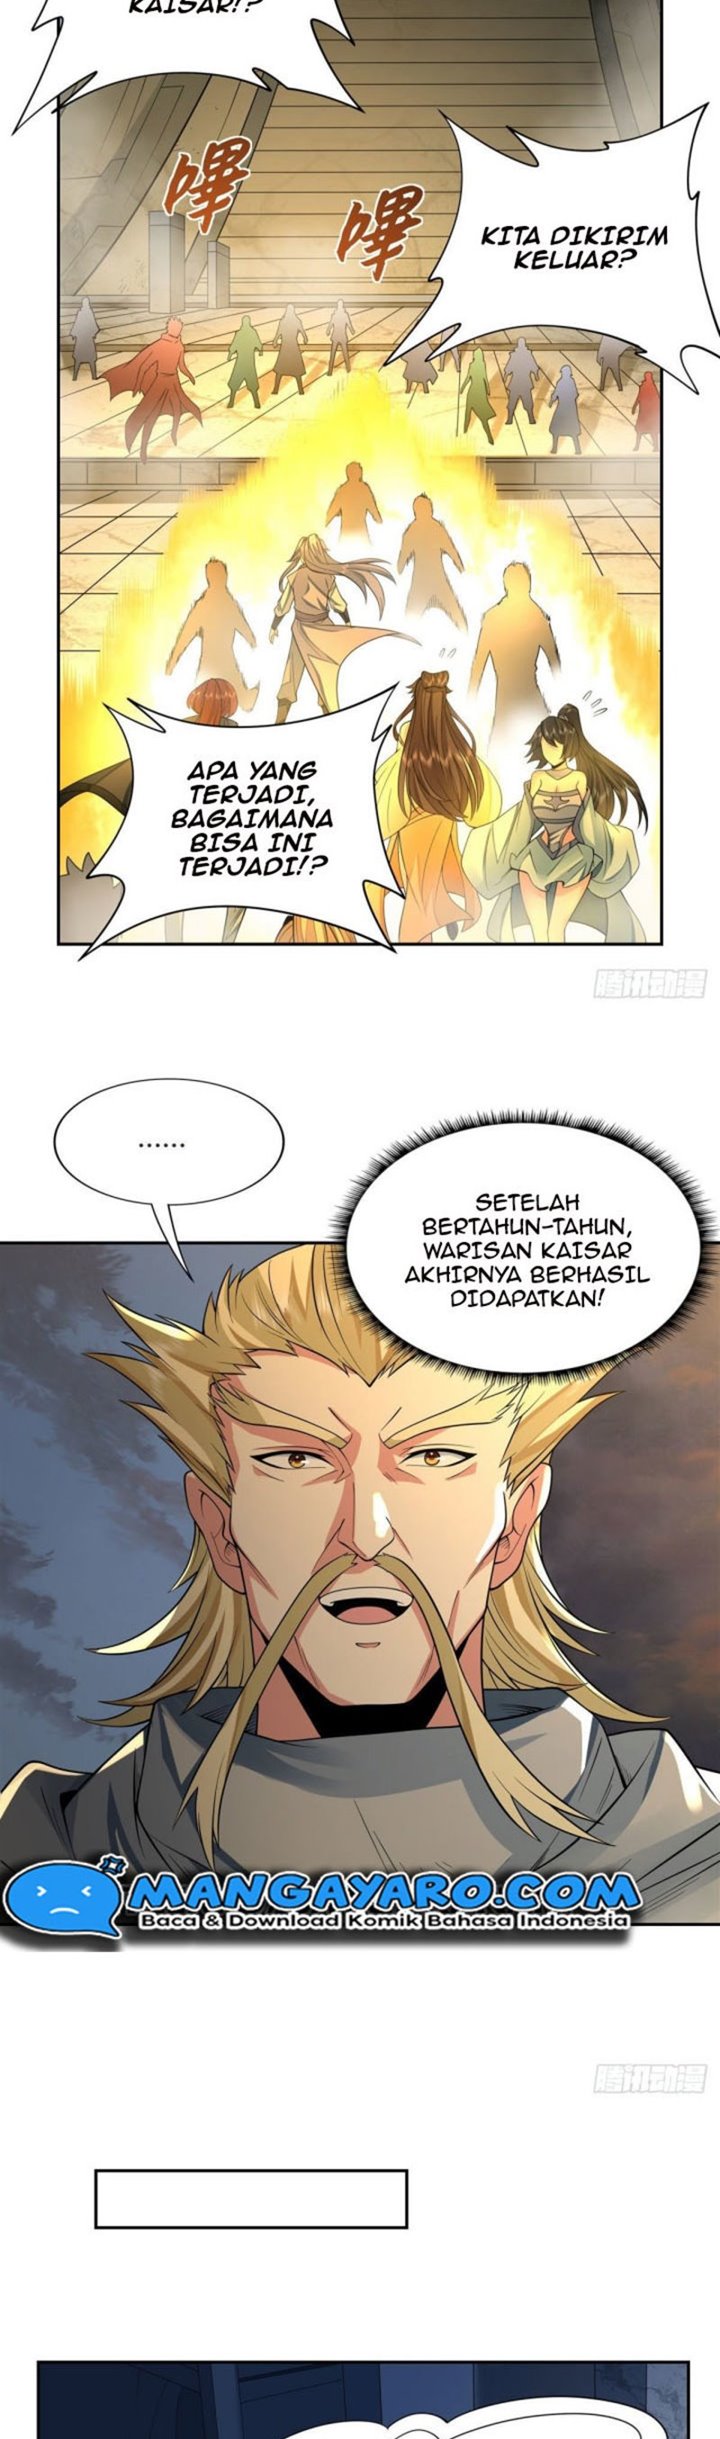 Dilarang COPAS - situs resmi www.mangacanblog.com - Komik my female apprentices are all big shots from the future 014 - chapter 14 15 Indonesia my female apprentices are all big shots from the future 014 - chapter 14 Terbaru 7|Baca Manga Komik Indonesia|Mangacan